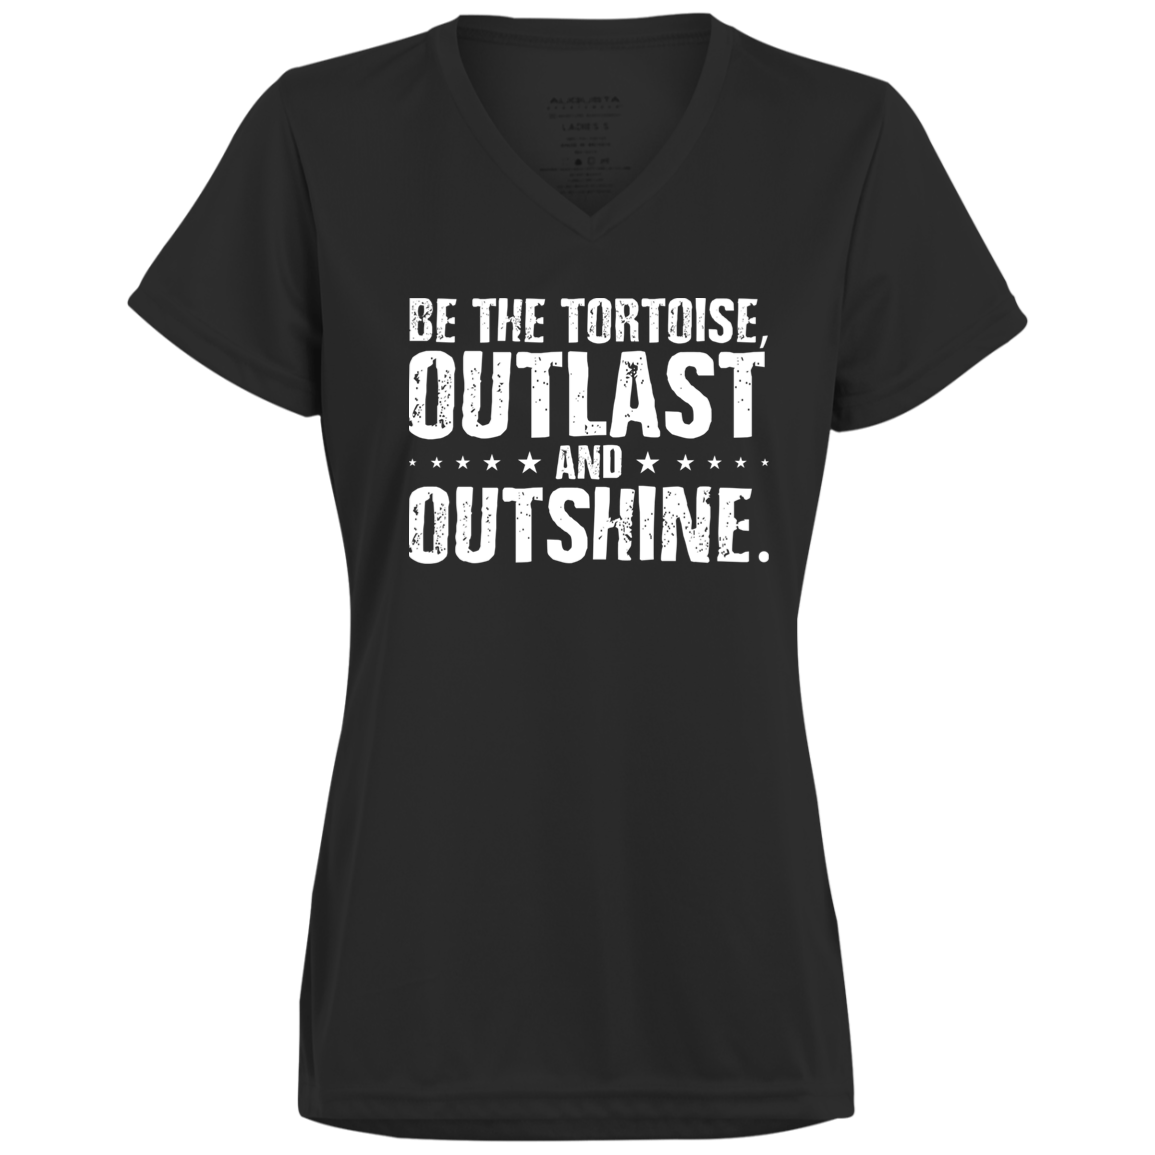 Women's Inspirational Top Be the tortoise, outlast and outshine